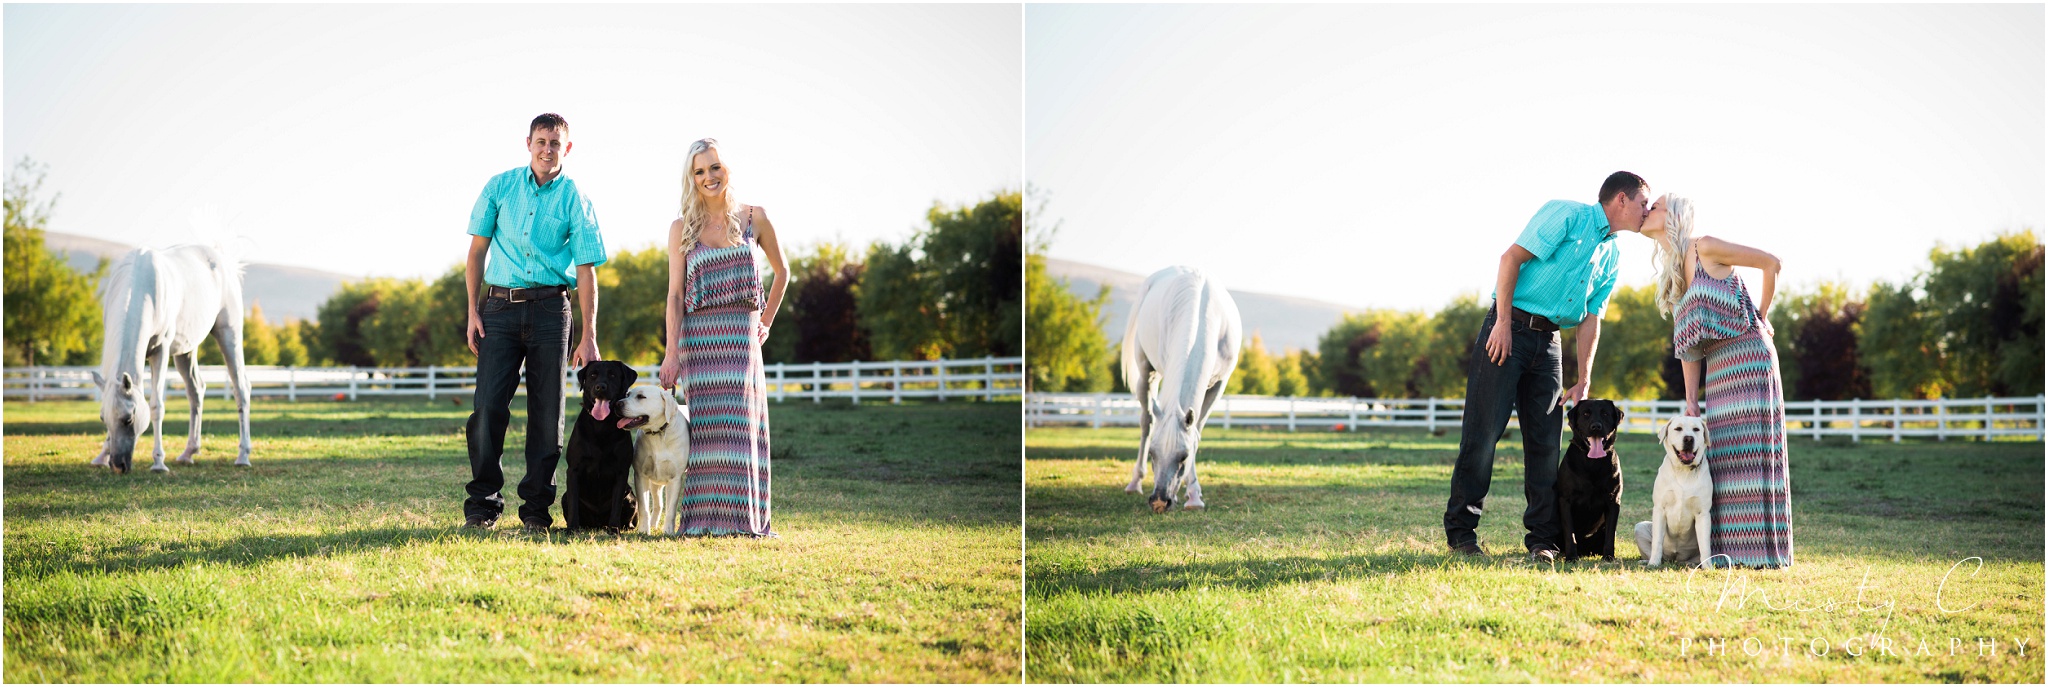 Country Engagement photos couple with horse and dogs photo